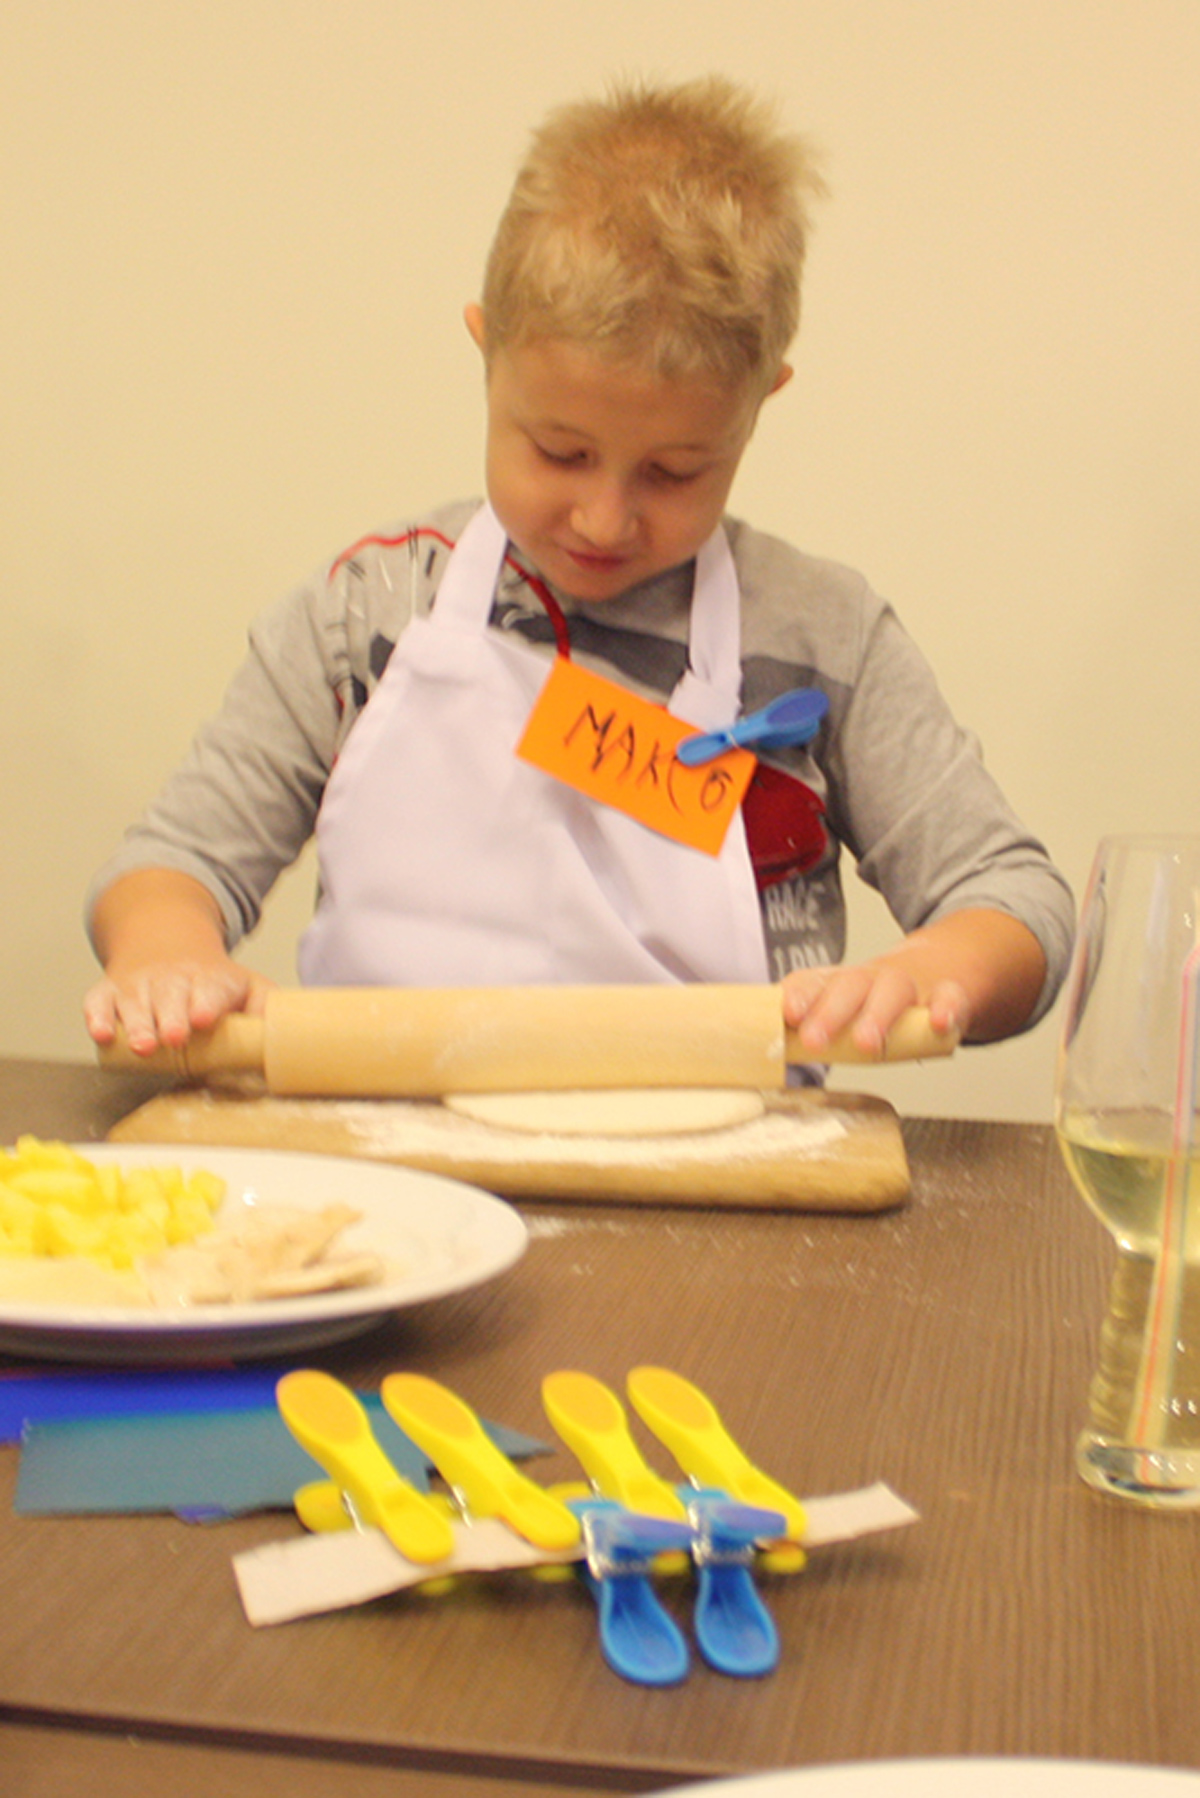 Kids make cookies. How to cook dinner for mom. Cooking classes in Odessa.